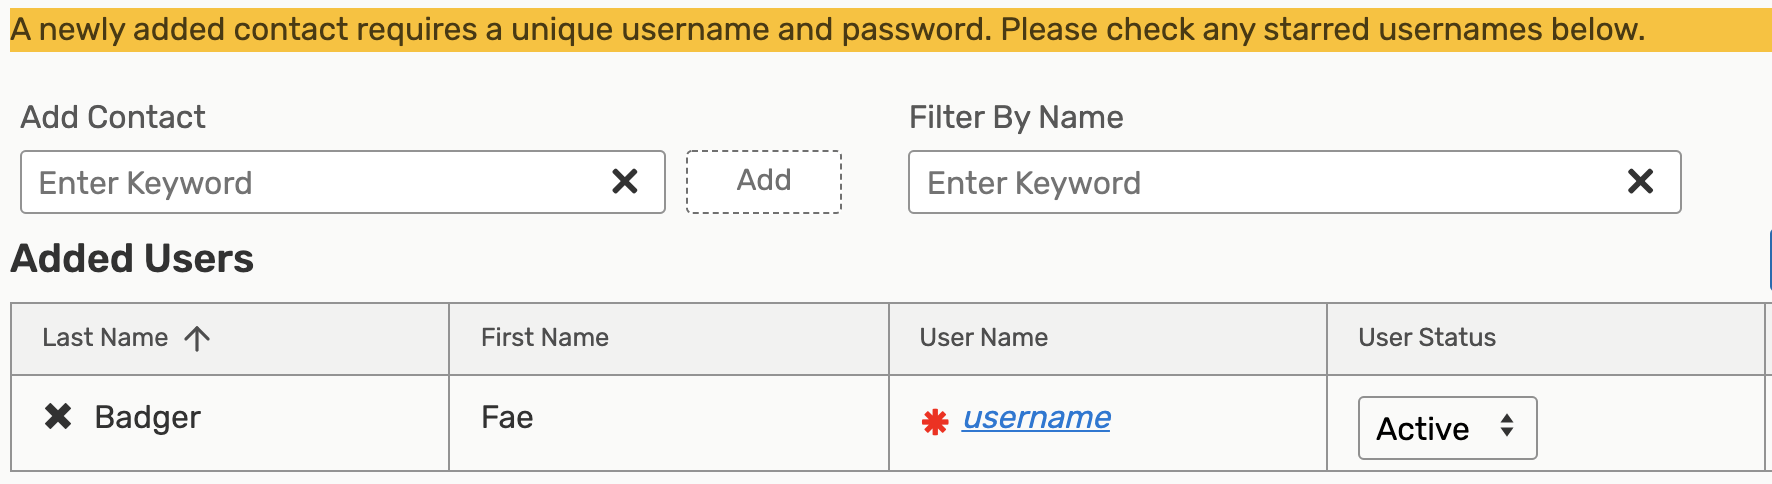 A table of users including Fae Badger with an indication that there is no username or password set